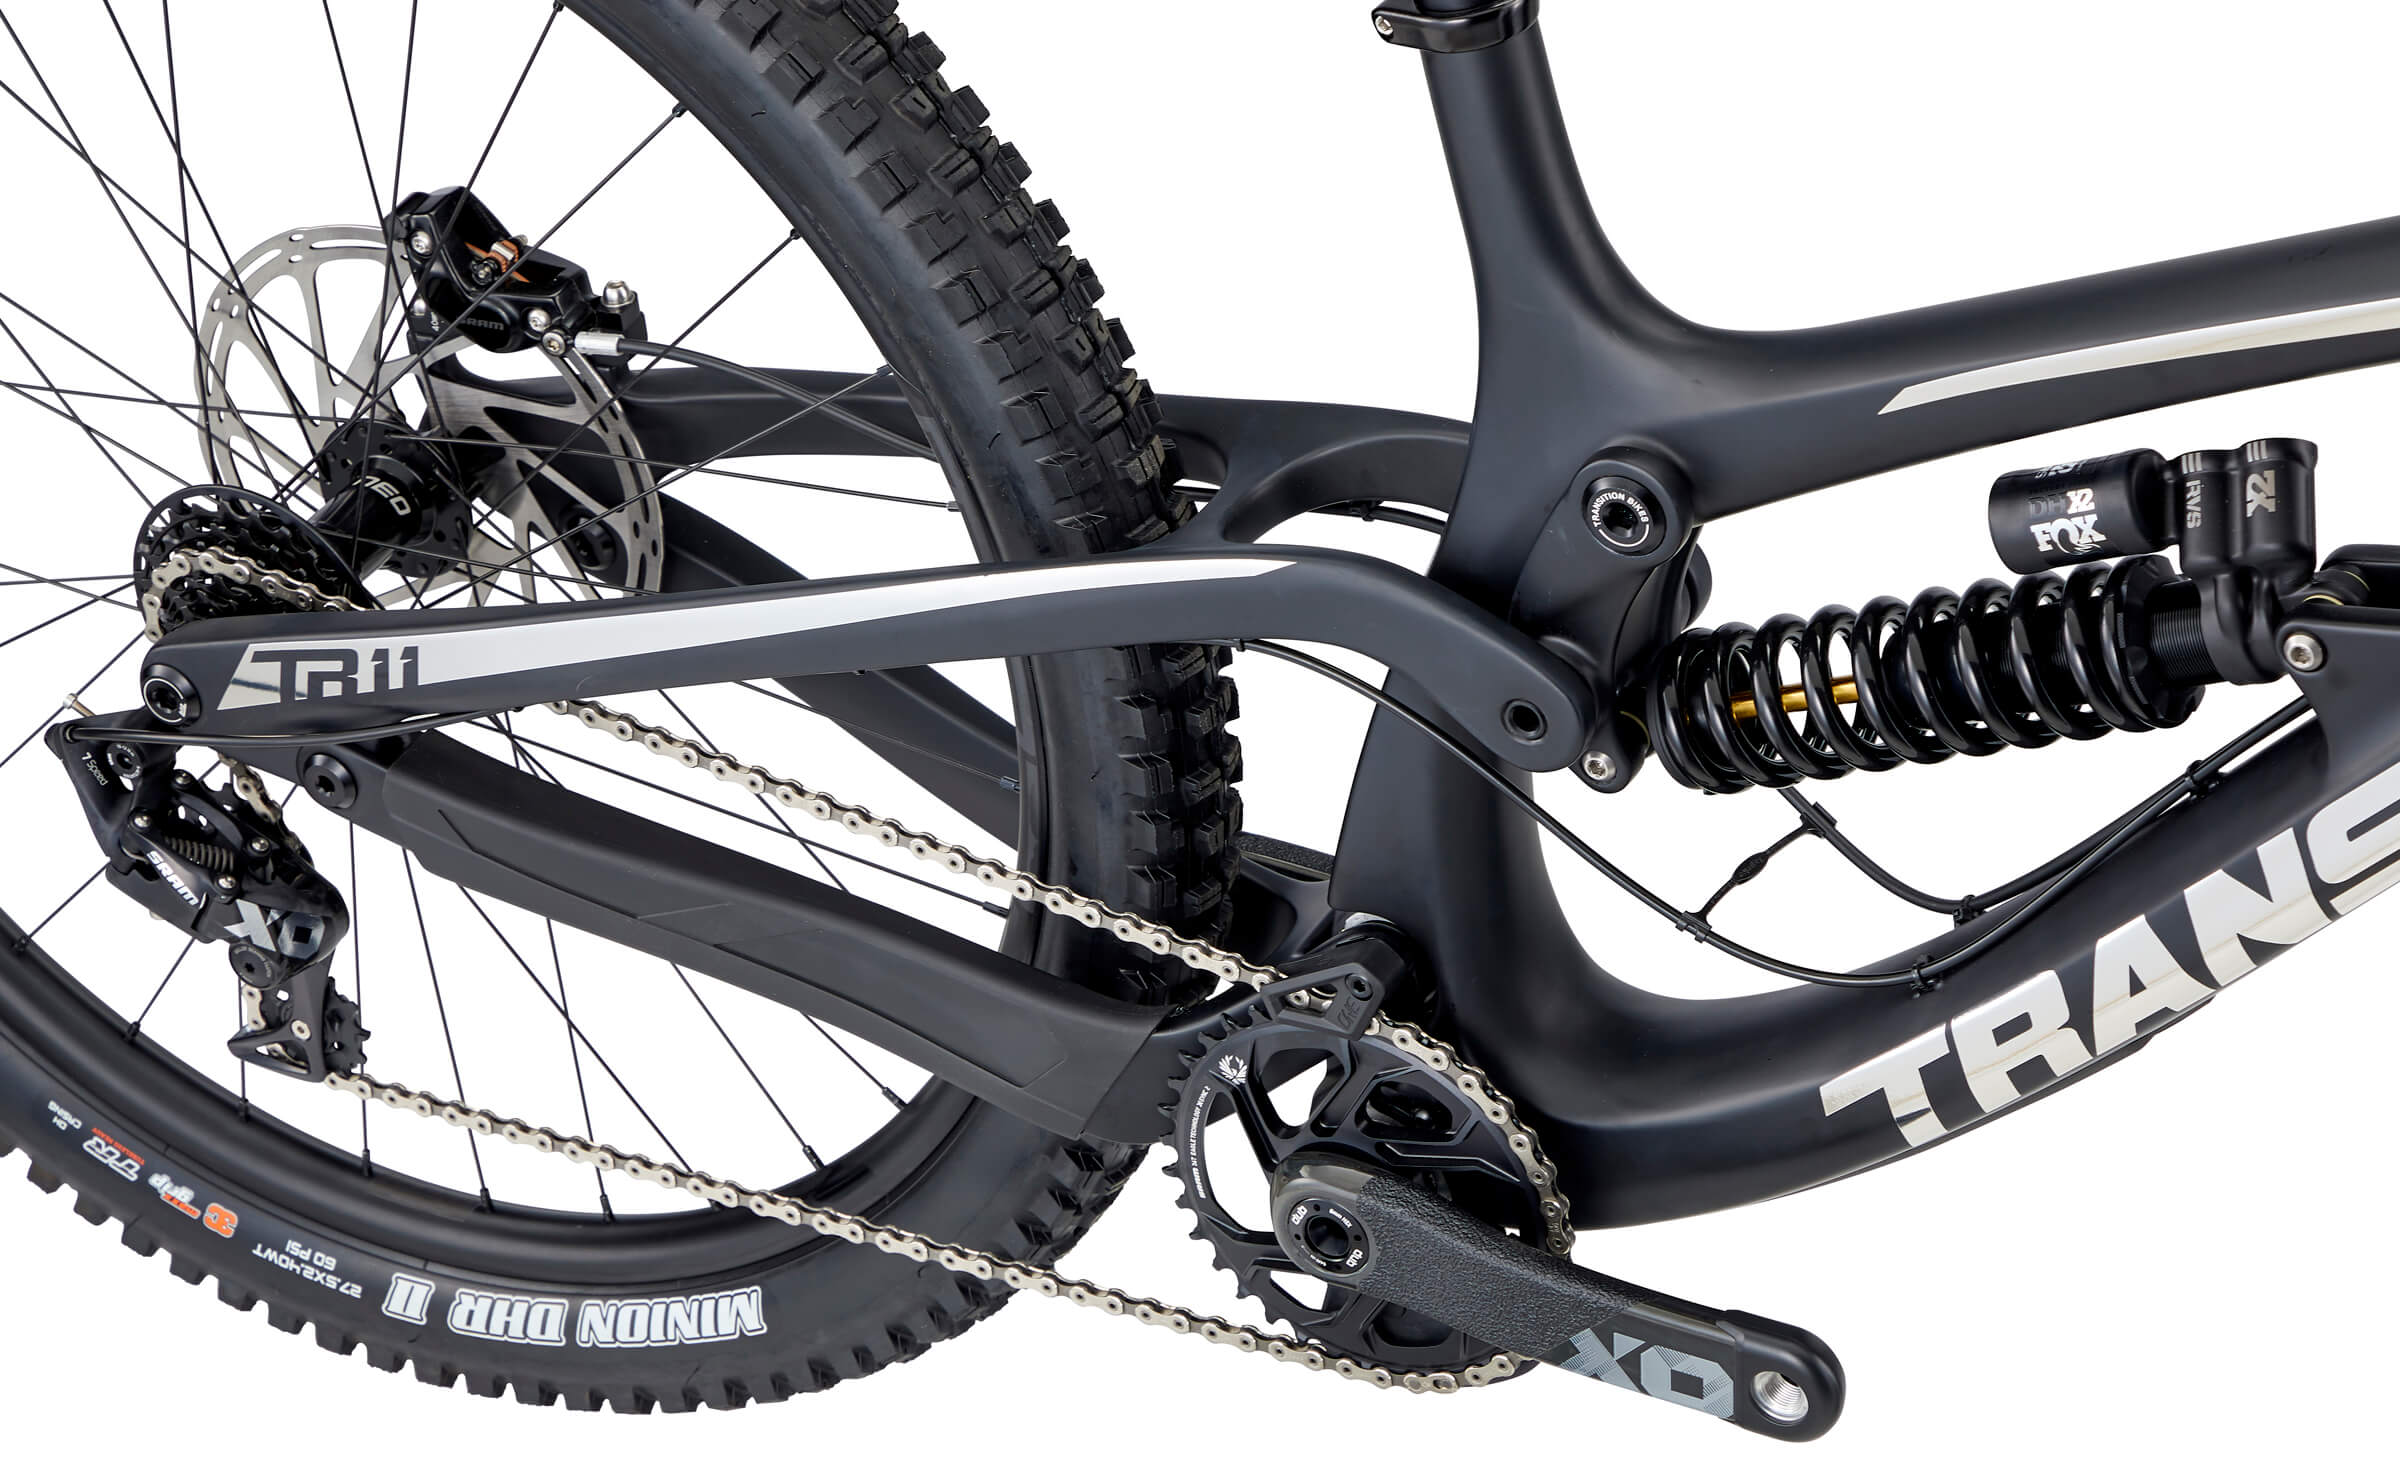 Transition cranks it to 11 again with updated TR11 carbon DH bike